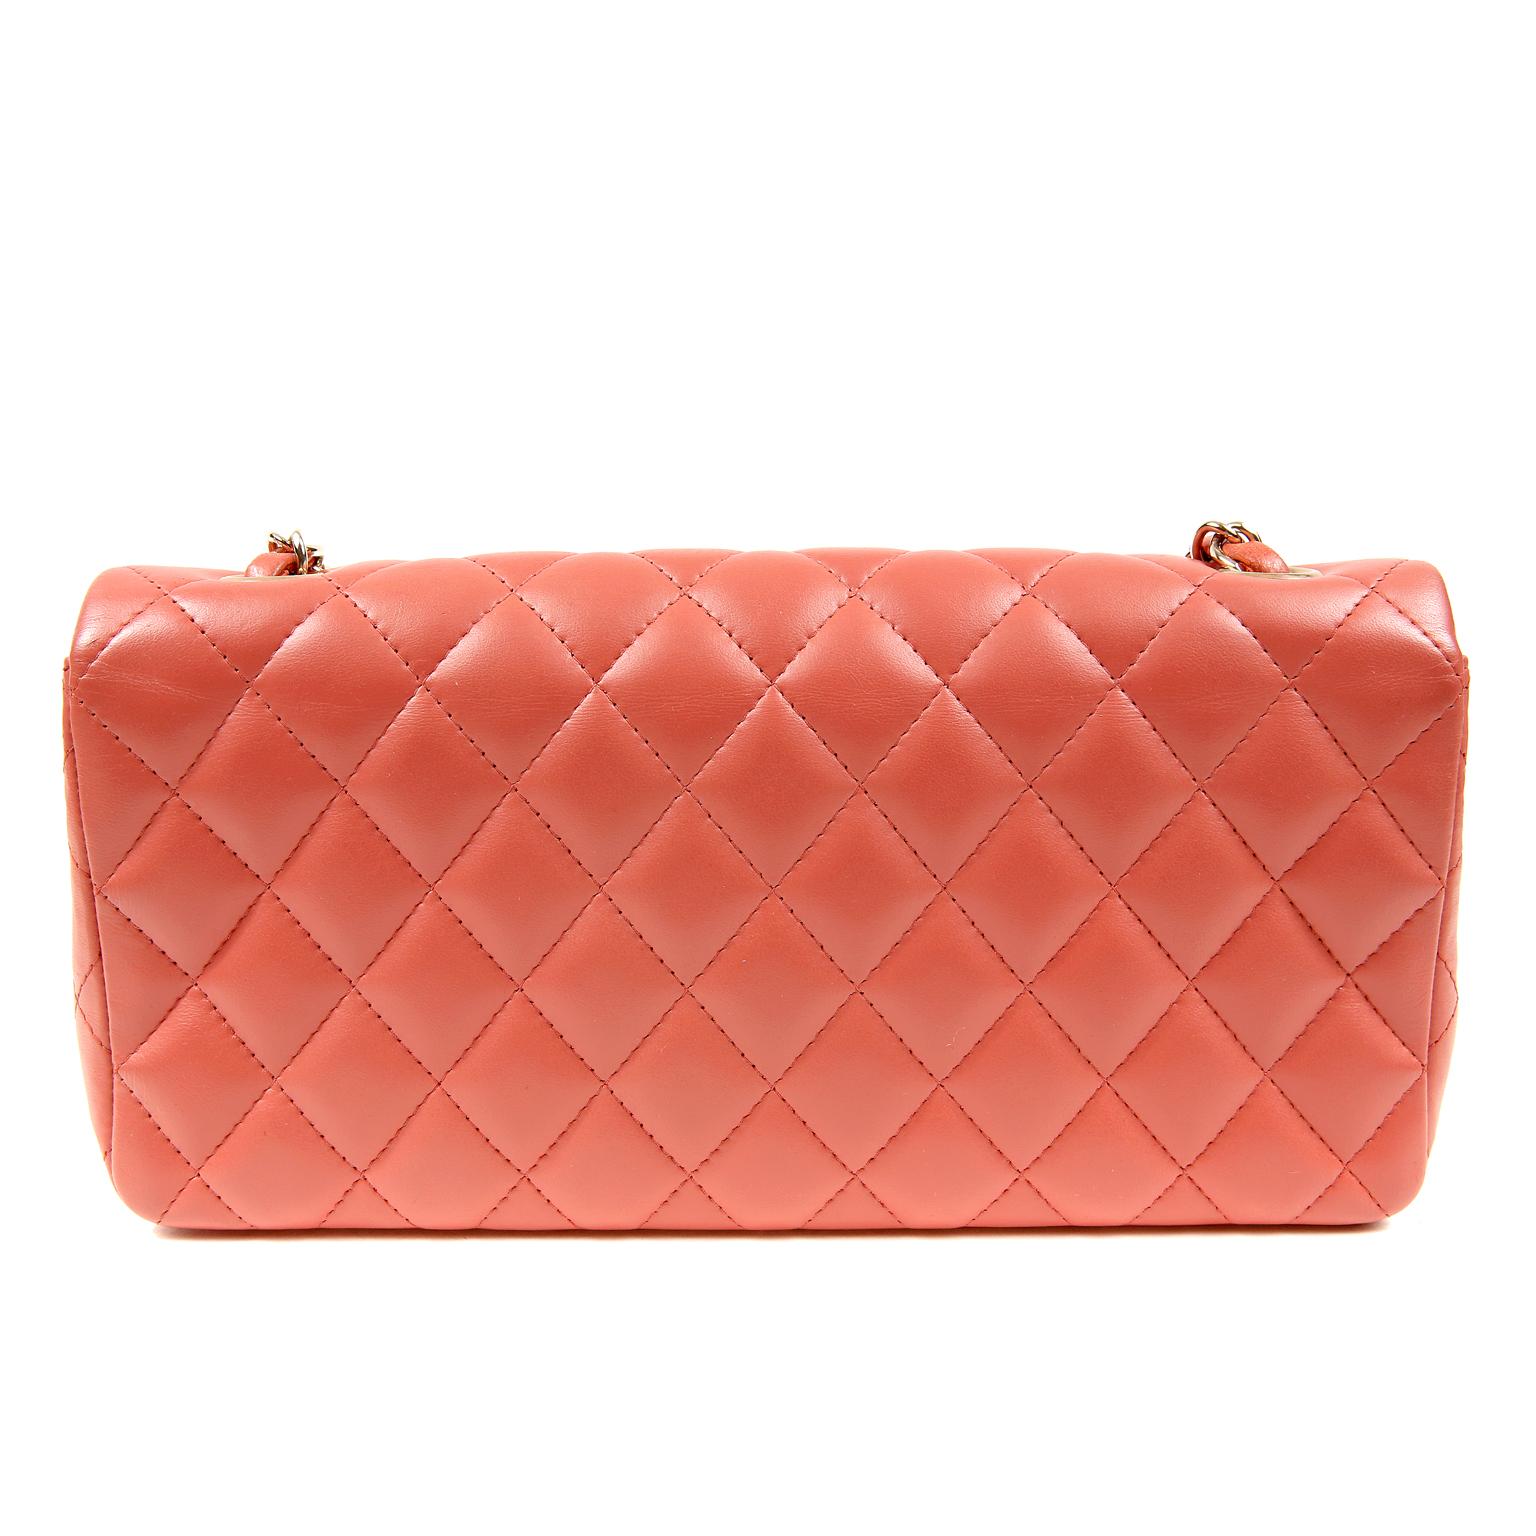 Chanel Salmon Lambskin East West Flap Bag- pristine, appearing never carried.  The captivating color and medium silhouette makes this Chanel a great addition to any collection. 
Corally salmon lambskin is quilted in signature Chanel diamond pattern.